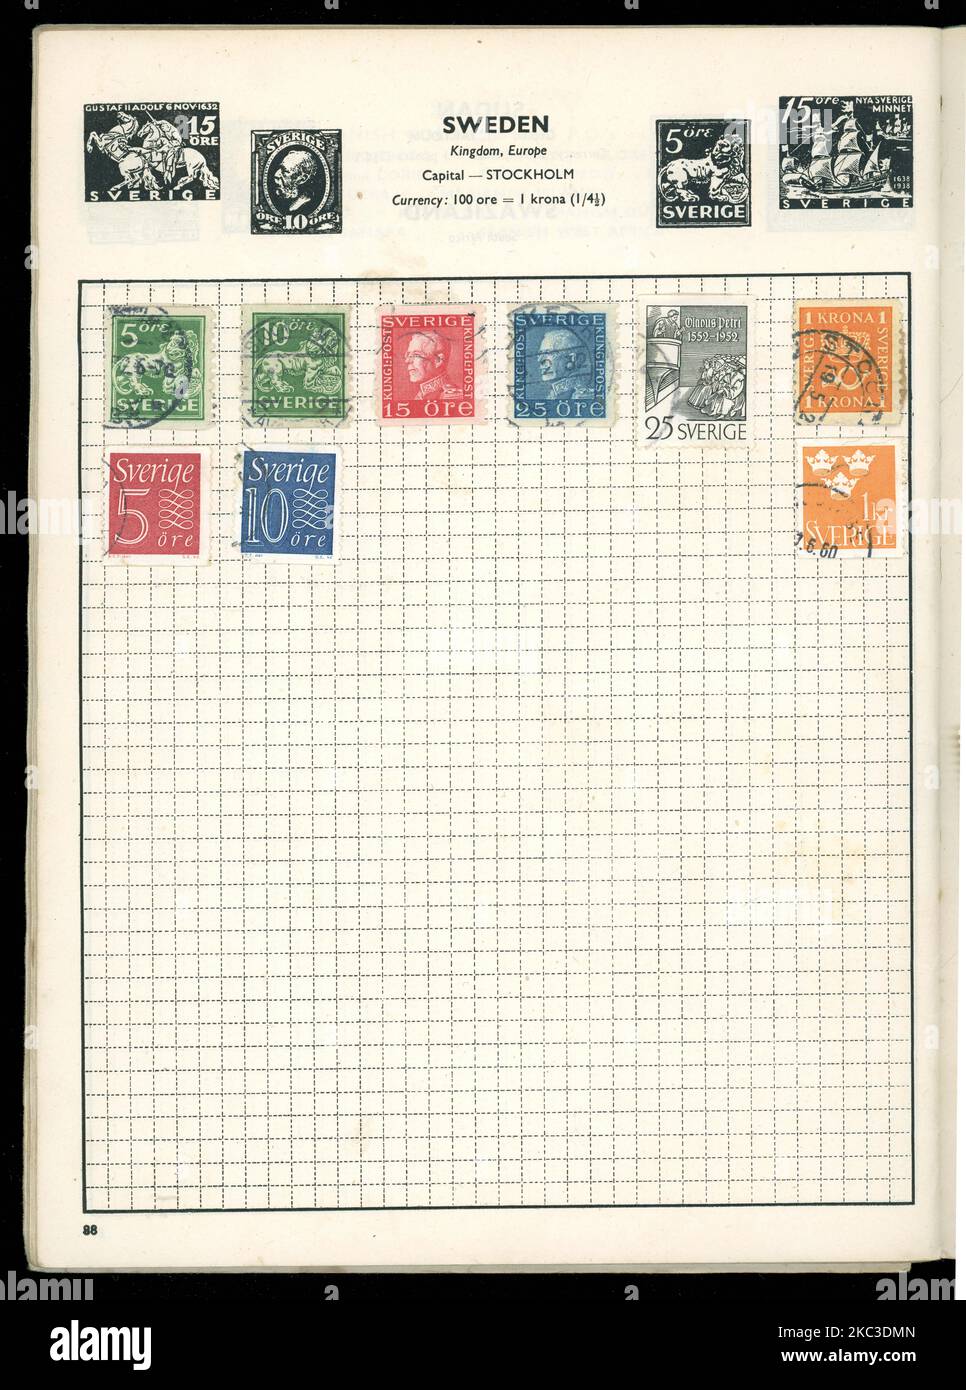 Original page from a vintage stamp album (Gay Venture by Stanley Gibbons) with stamps from Sweden some dated 1952, one 1960. Stock Photo